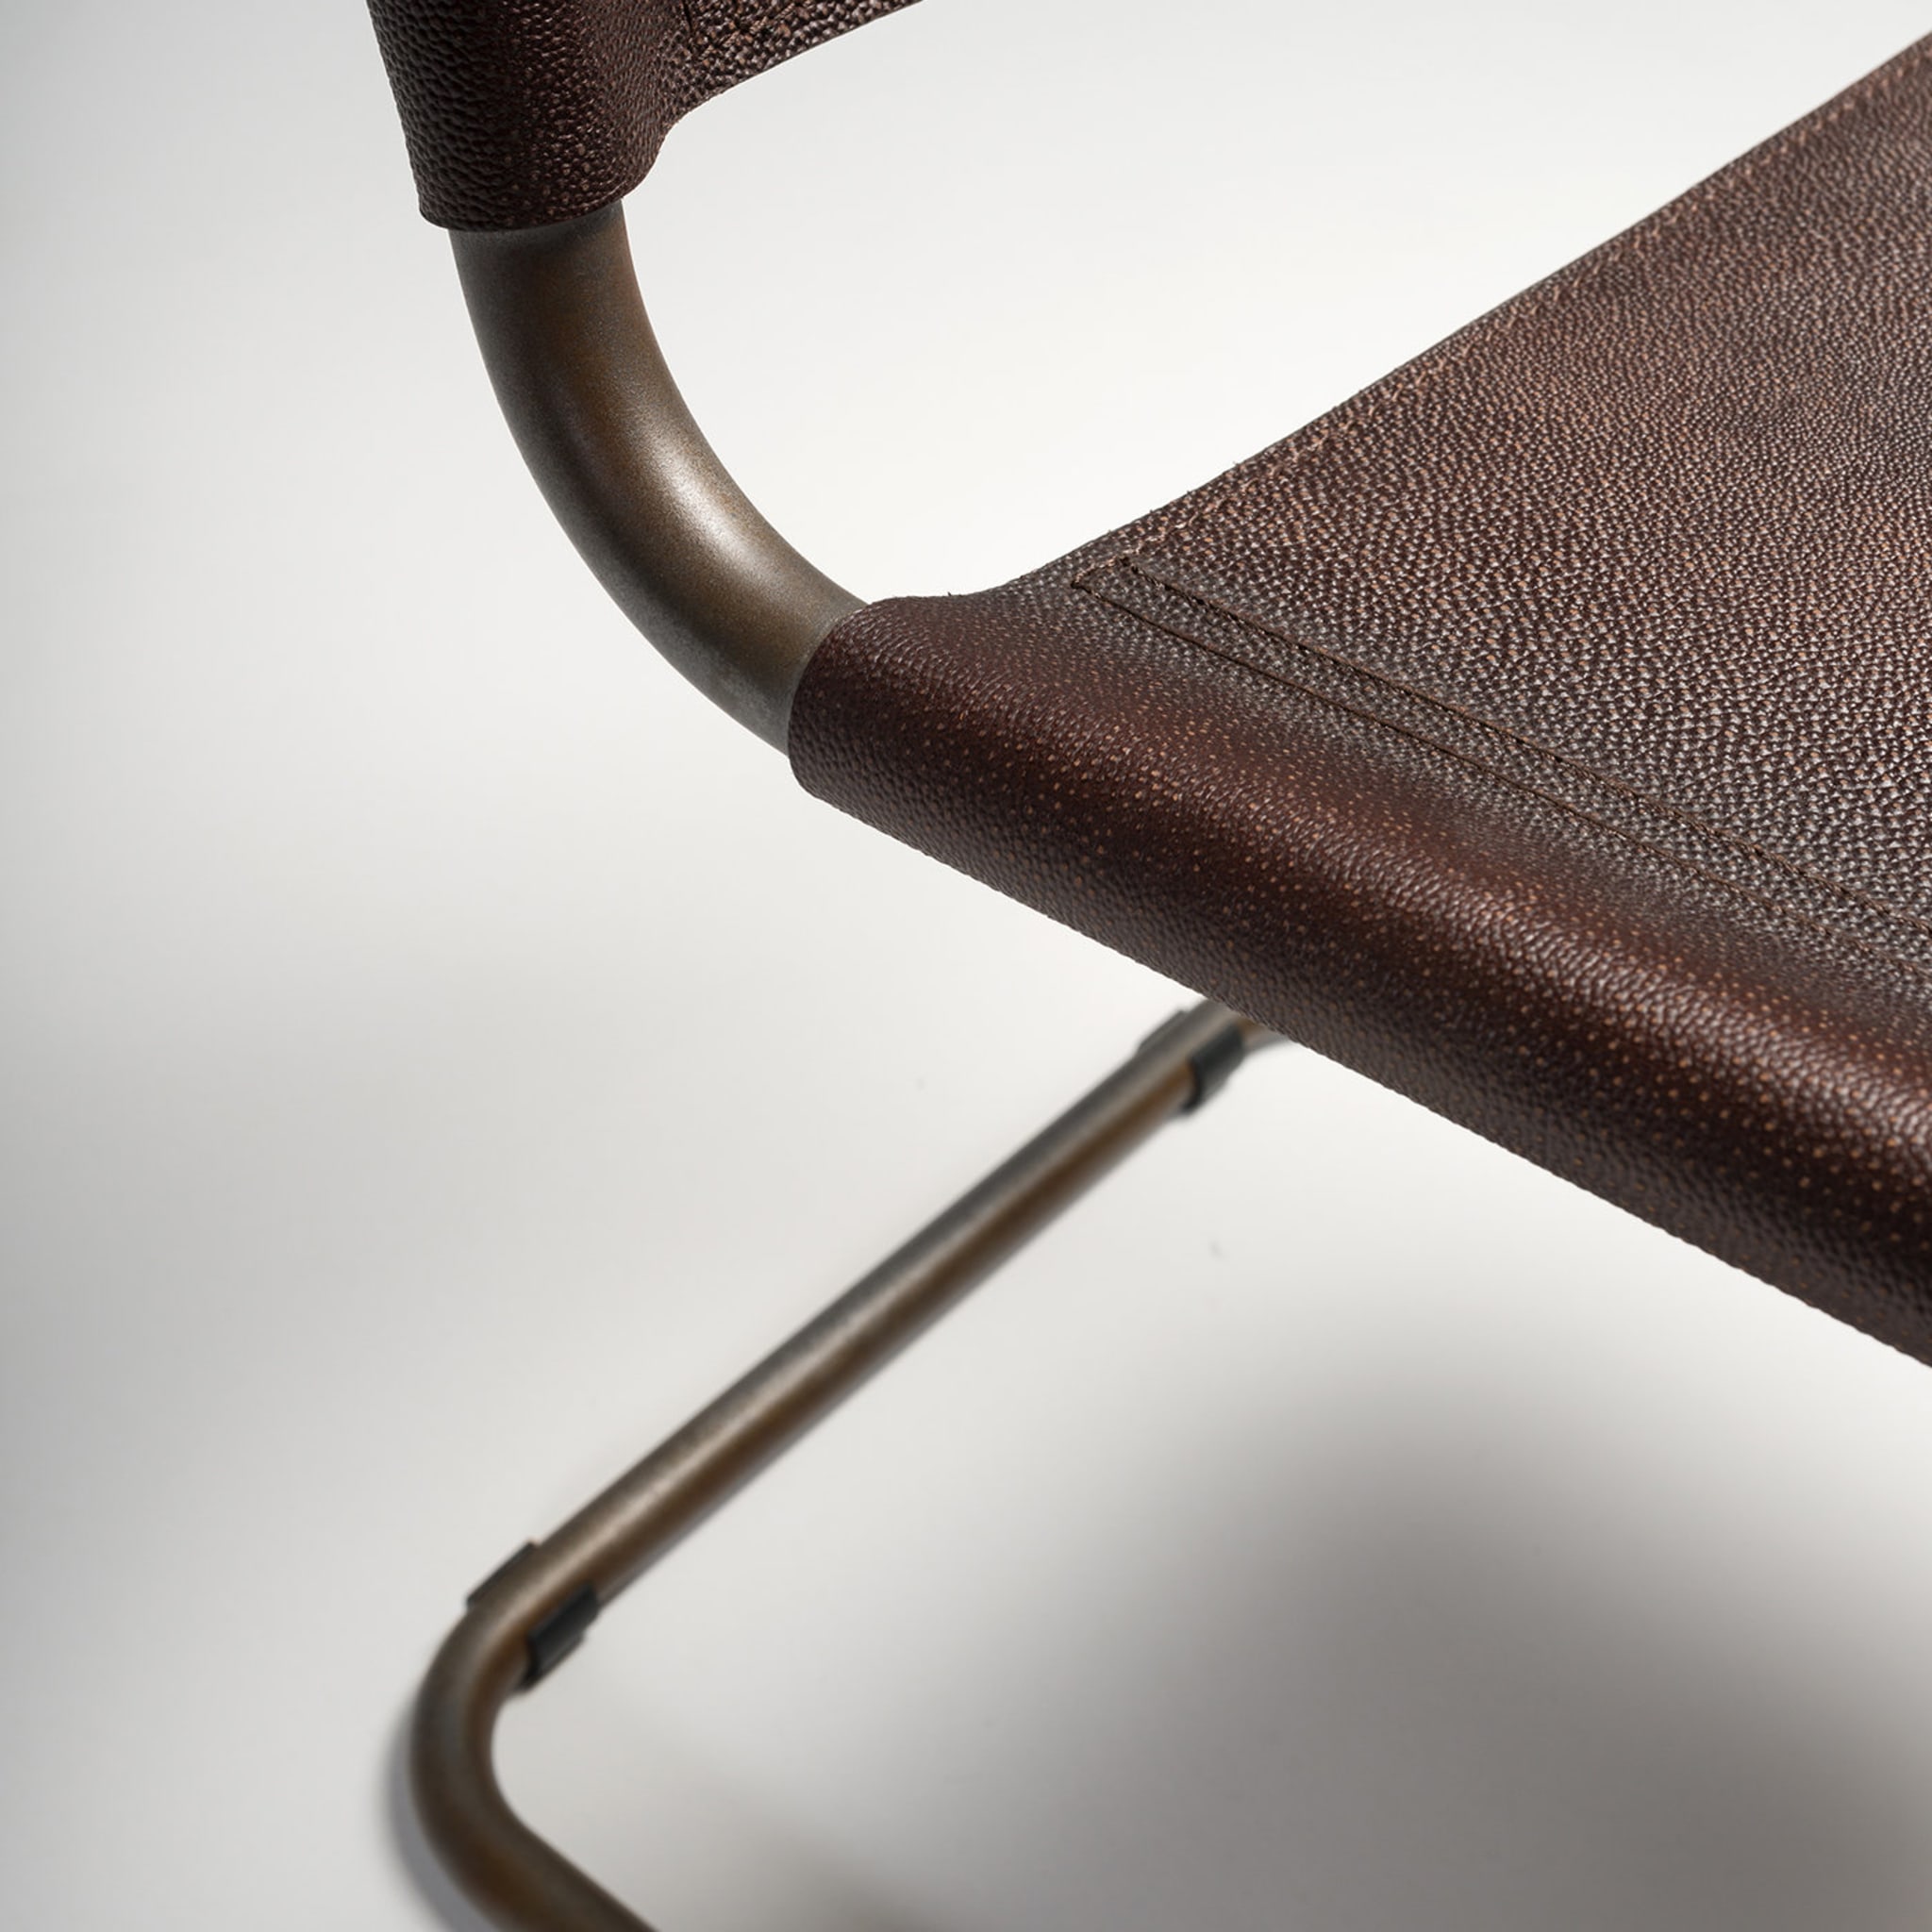 Meccanica chair by Marco and Giulio Mantellassi - Alternative view 1